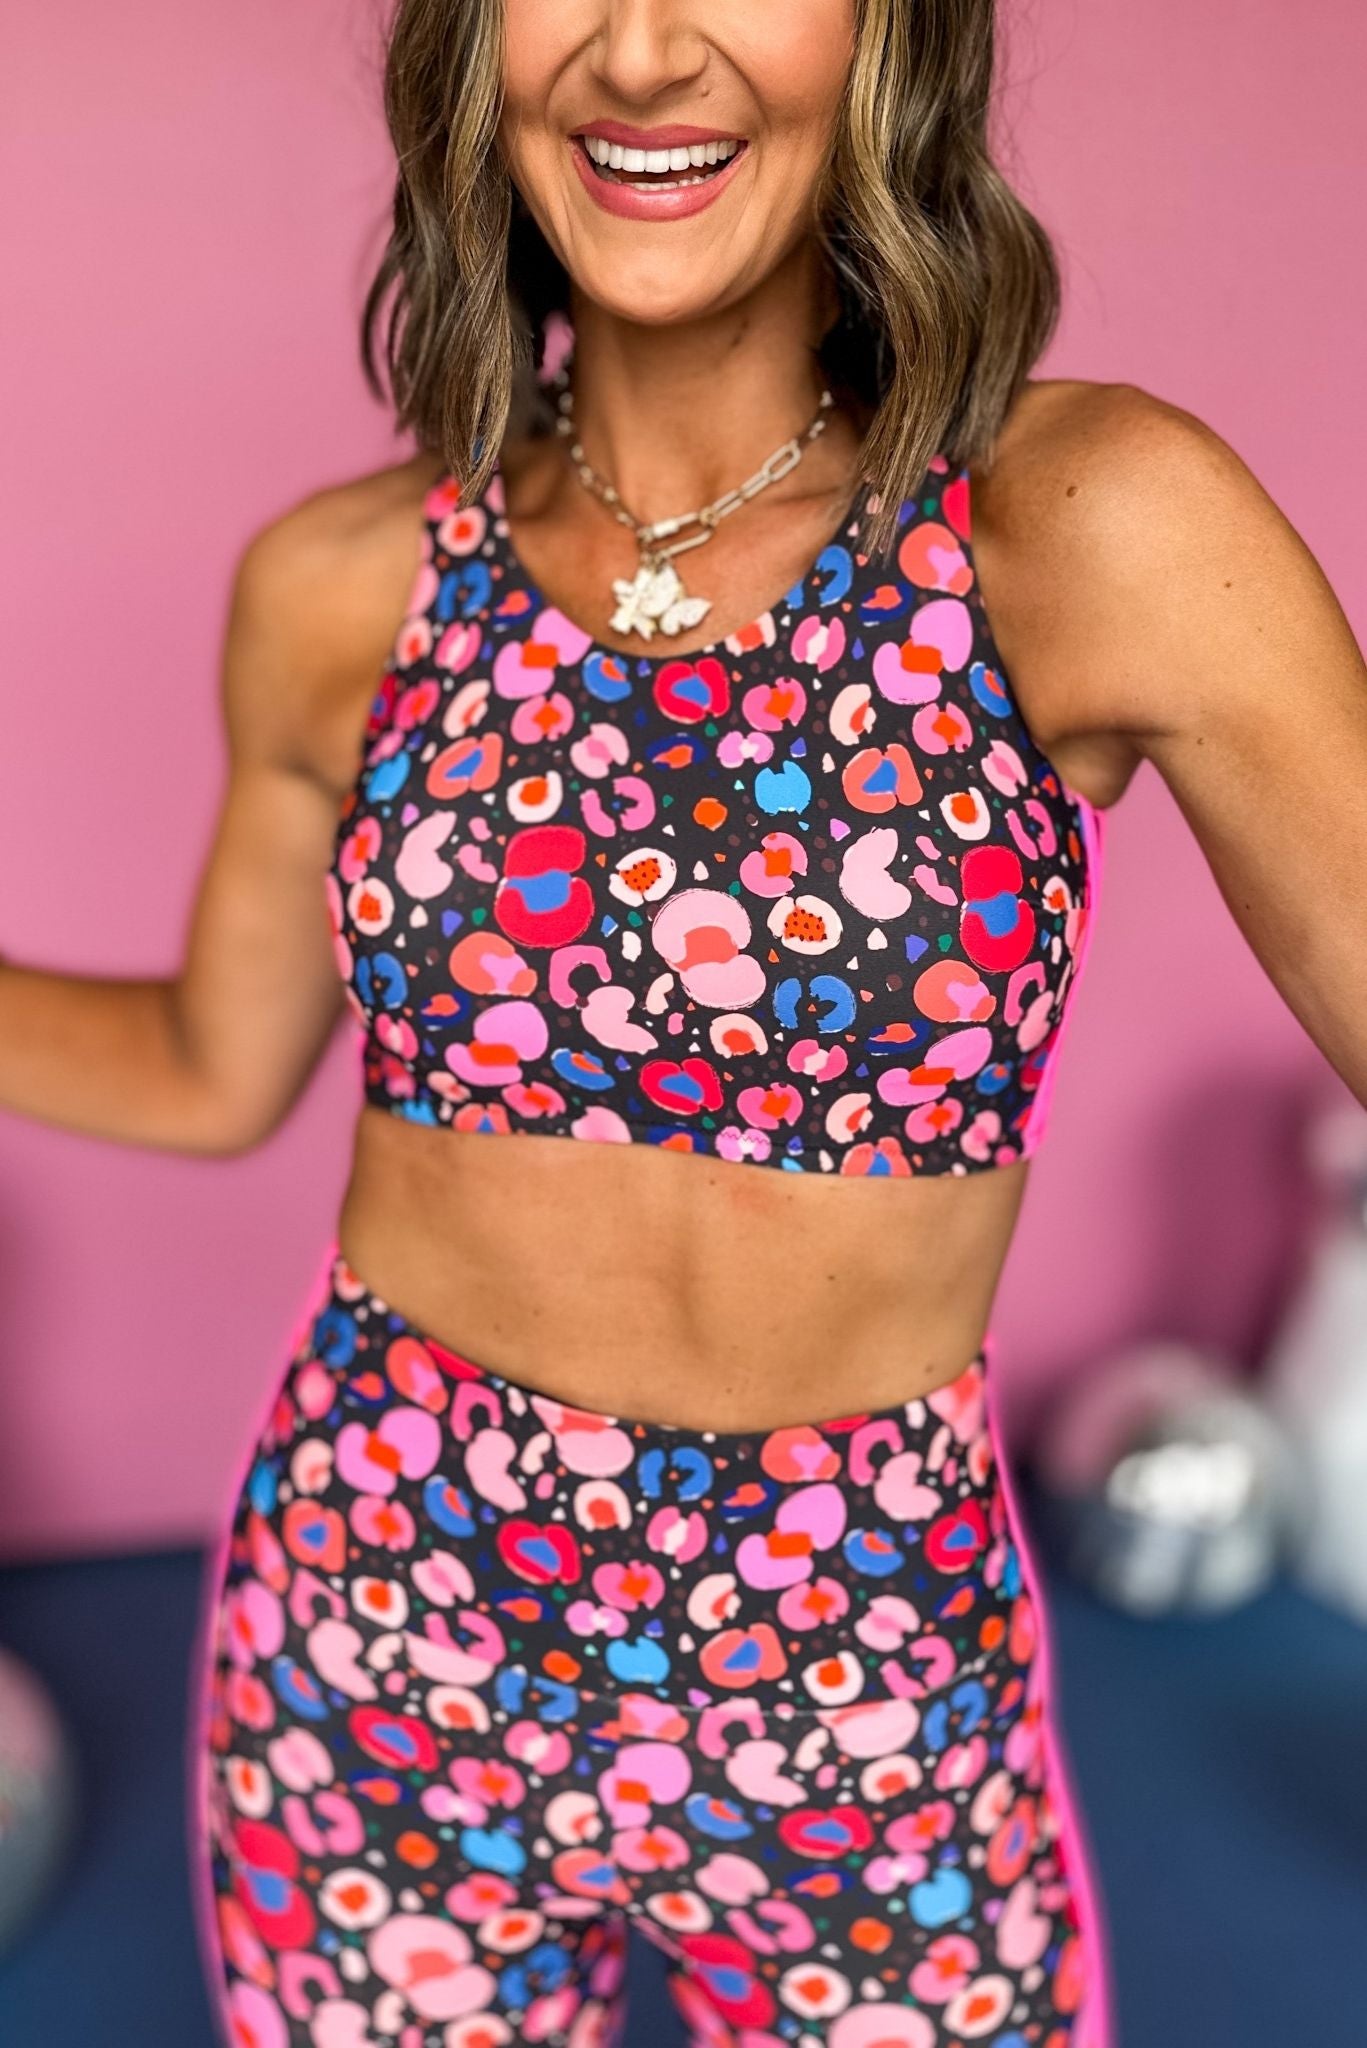 SSYS Abstract Animal Print Sports Bra With Pink Stripes, must have sports bra, must have athleisure, elevated style, elevated athleisure, mom style, active style, active wear, fall athleisure, fall style, comfortable style, elevated comfort, shop style your senses by mallory fitzsimmons